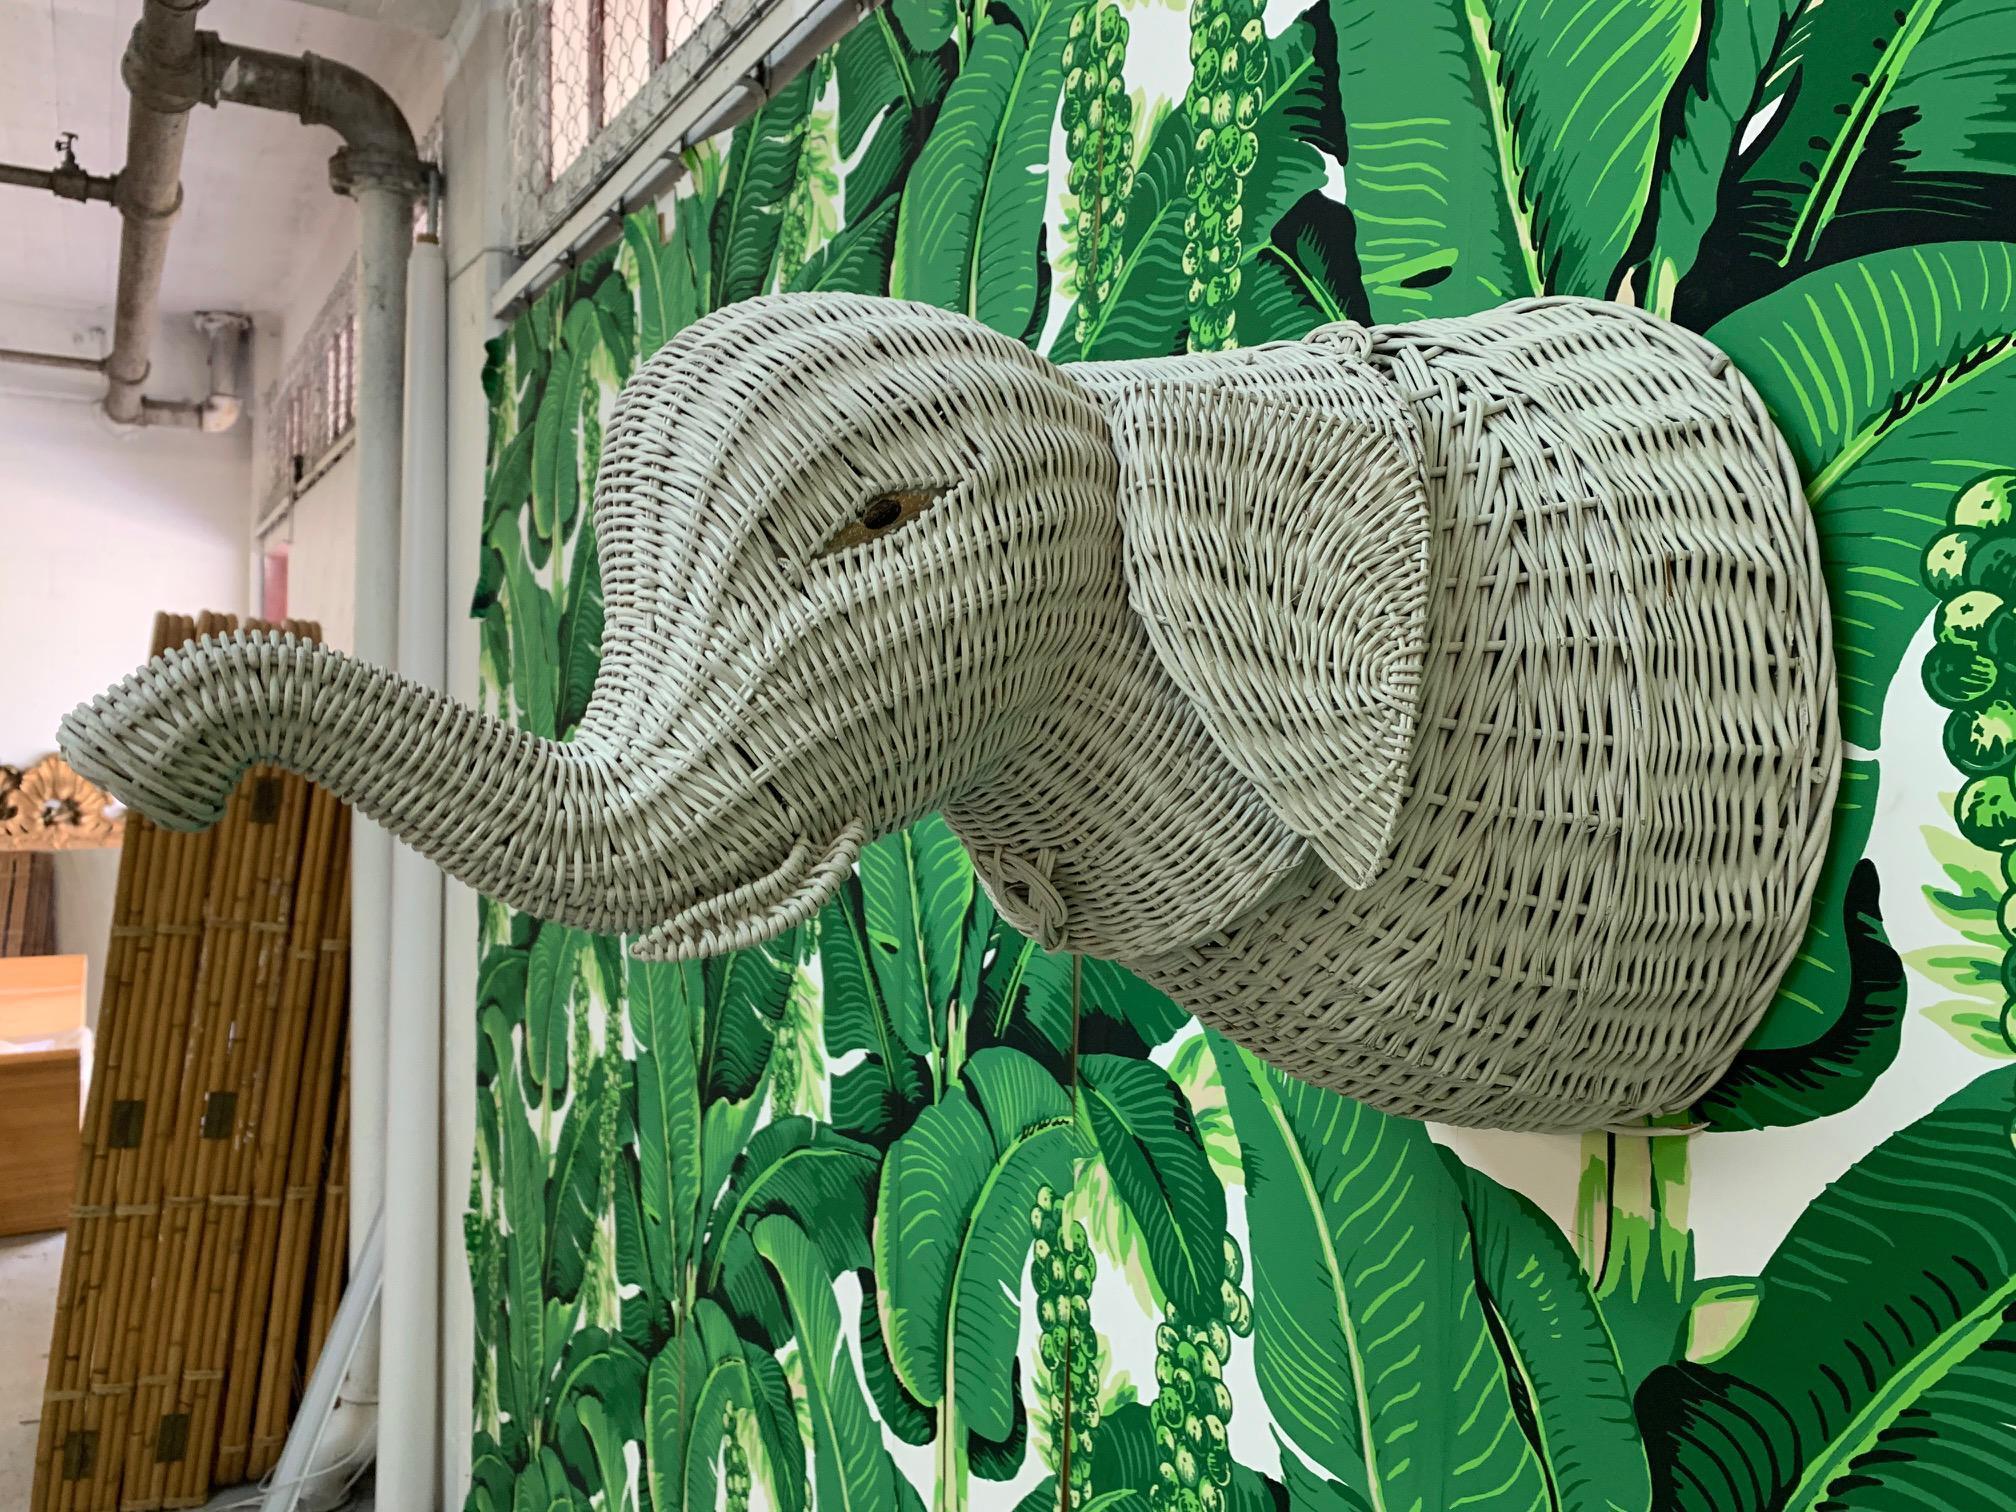 Vintage wicker elephant head to grace any wall and add a bit of whimsy to any decor. Good condition with minor imperfections consistent with age, see photos for condition details. 
For a shipping quote to your exact zip code, please message us.
